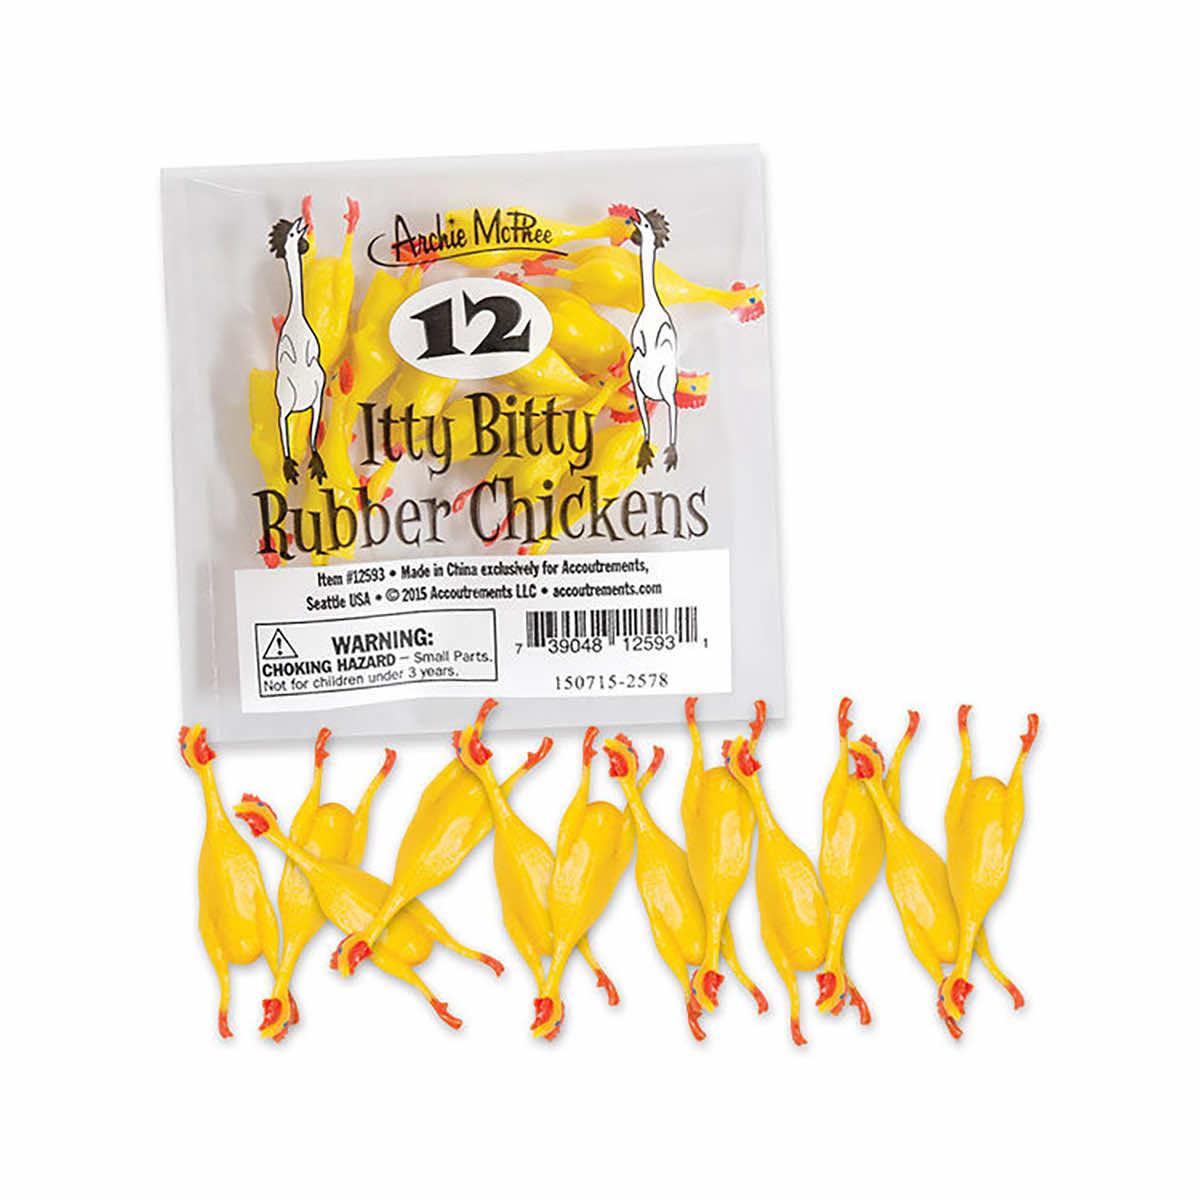  Bag Of Itty Bitty Rubber Chickens Toy